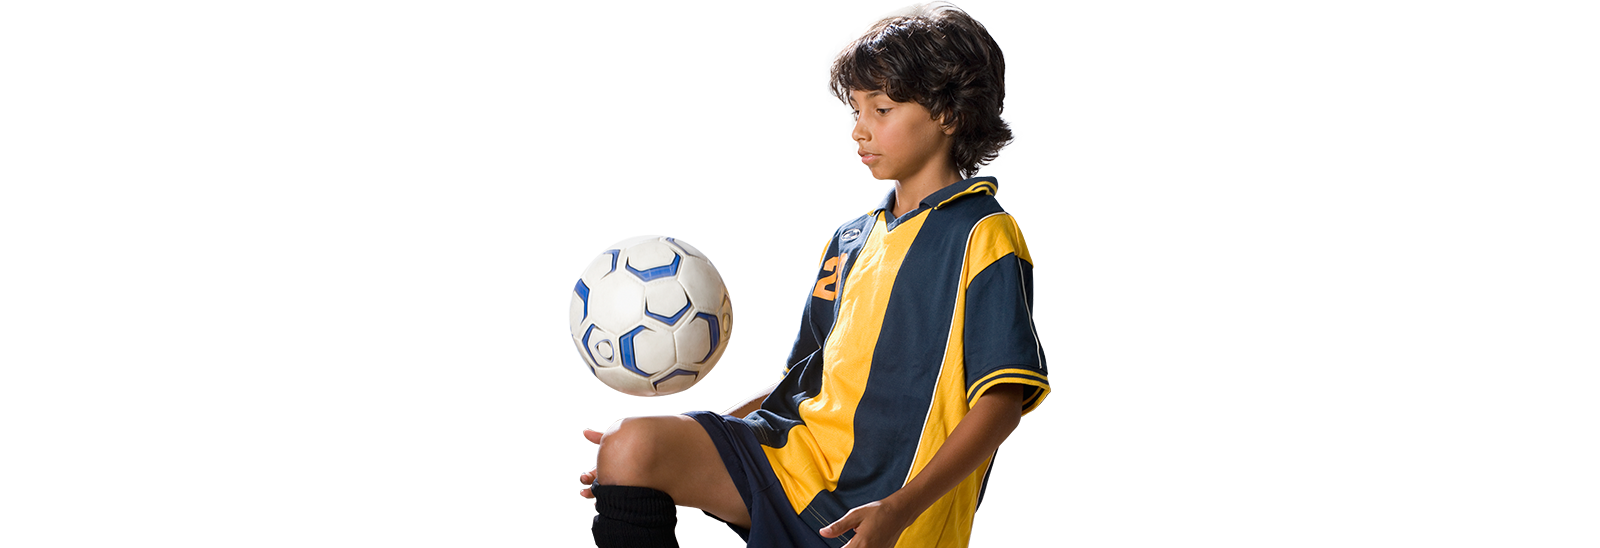 Photo of boy playing soccer.